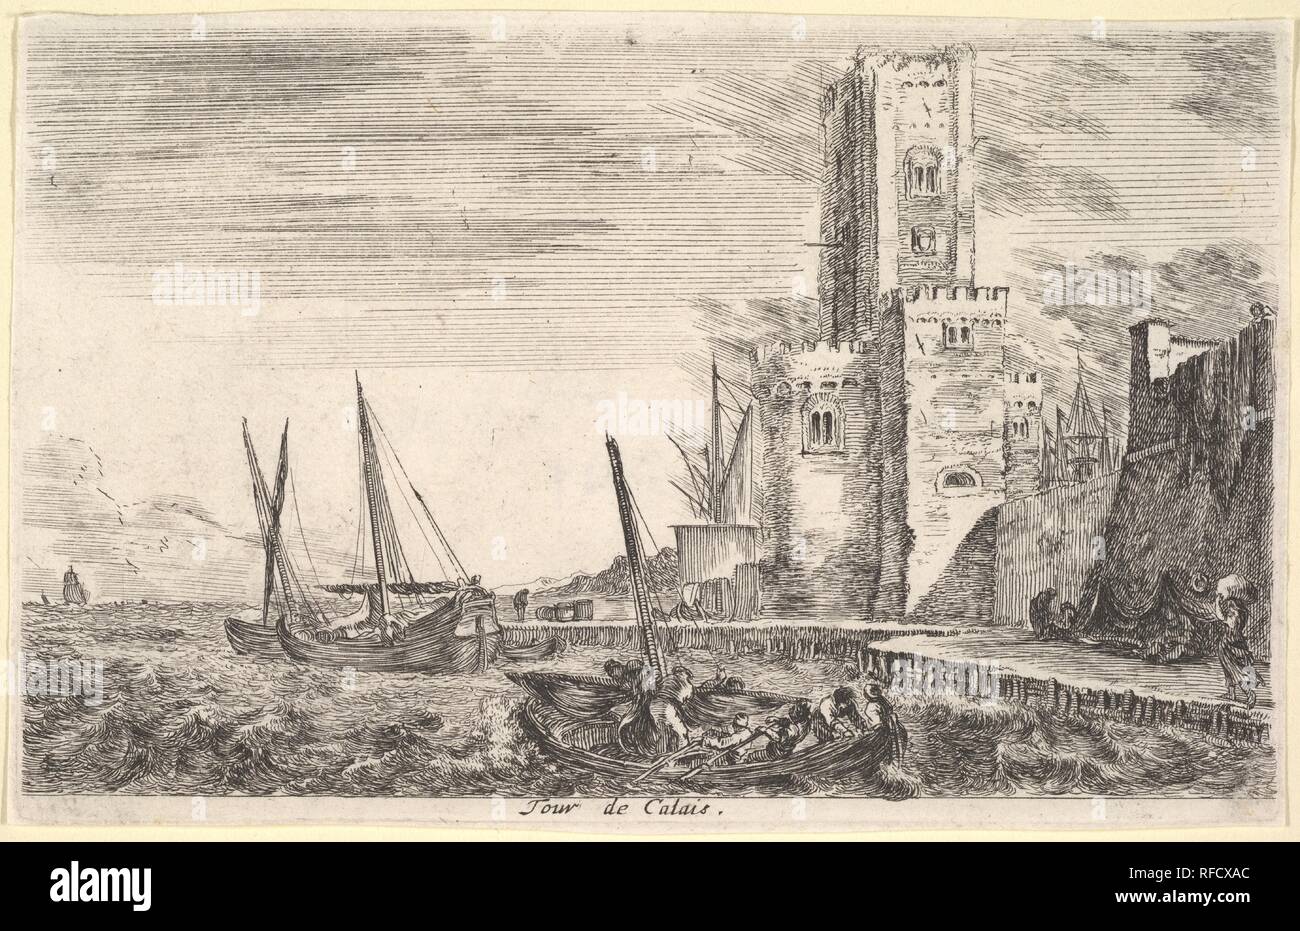 Tower of Calais (Tour de Calais), tower to right, two ships in the sea to left and in center, from 'Views of seaports' (Vues de ports de mar). Artist: Stefano della Bella (Italian, Florence 1610-1664 Florence). Dimensions: Sheet: 3 7/16 x 5 3/8 in. (8.8 x 13.7 cm). Series/Portfolio: 'Views of seaports' (Vues de ports de mar). Date: 1647. Museum: Metropolitan Museum of Art, New York, USA. Stock Photo